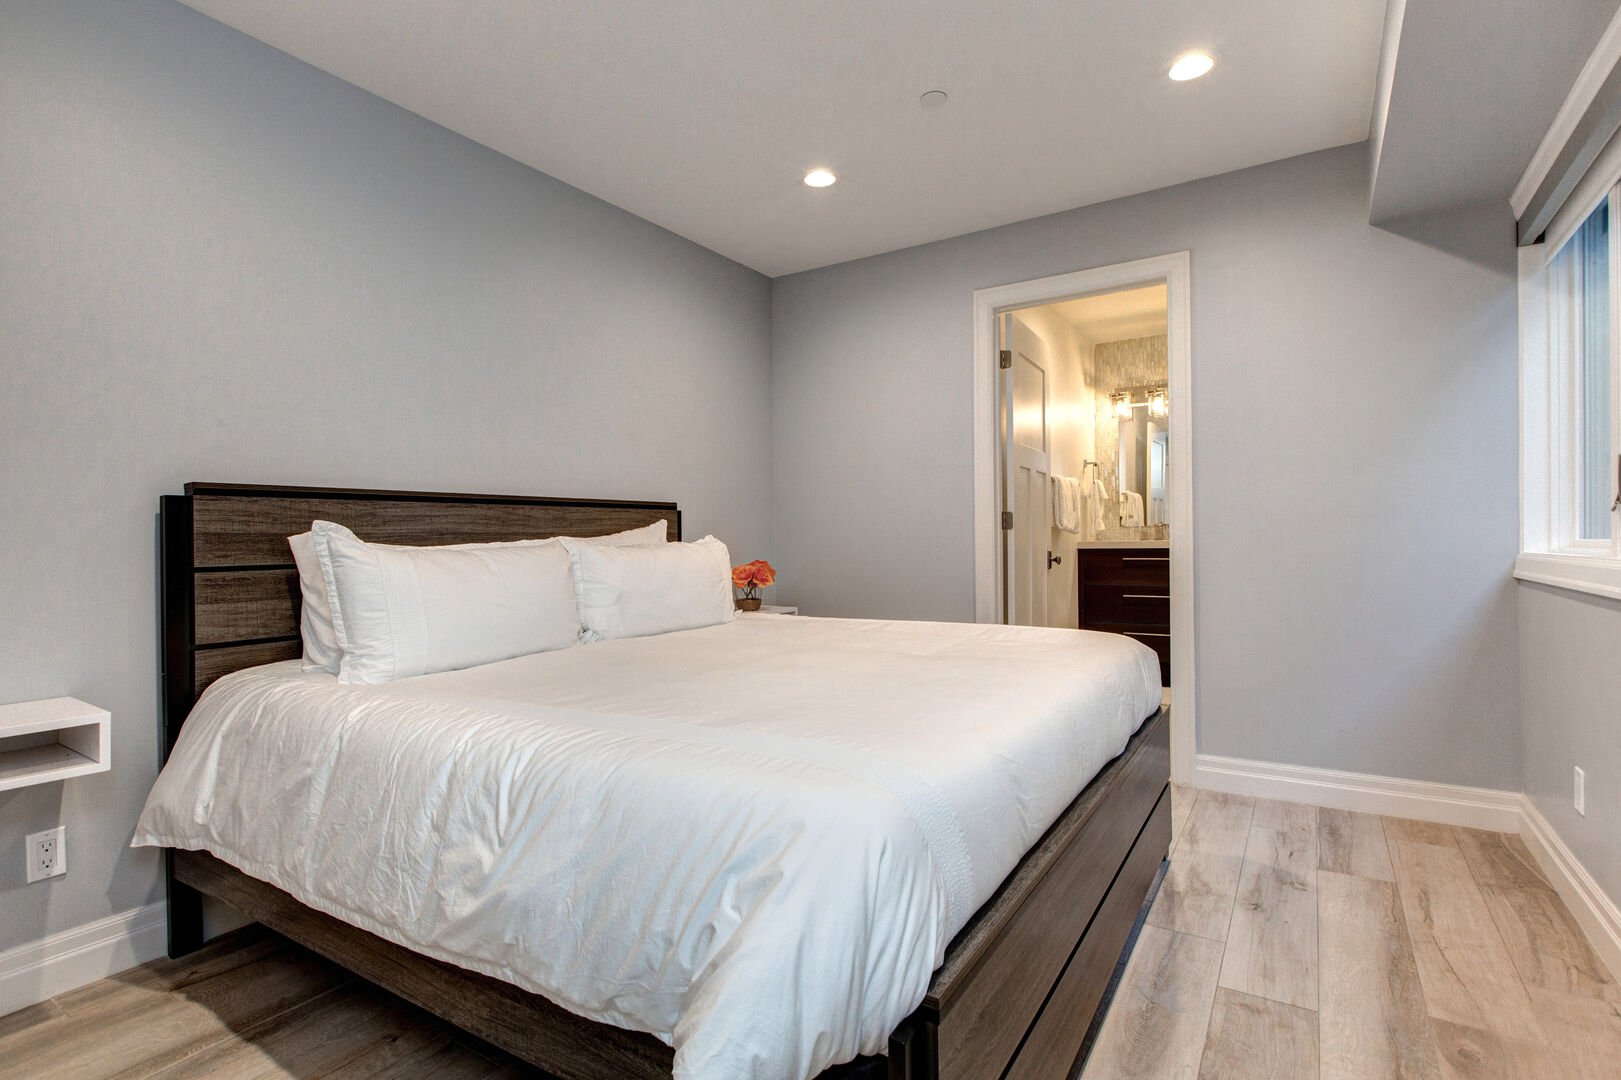 Bedroom 3 | Lower Level, King Bed, TV, Closet, Full Ensuite Bathroom with Shower/Tub Combo | Abode at First Chair